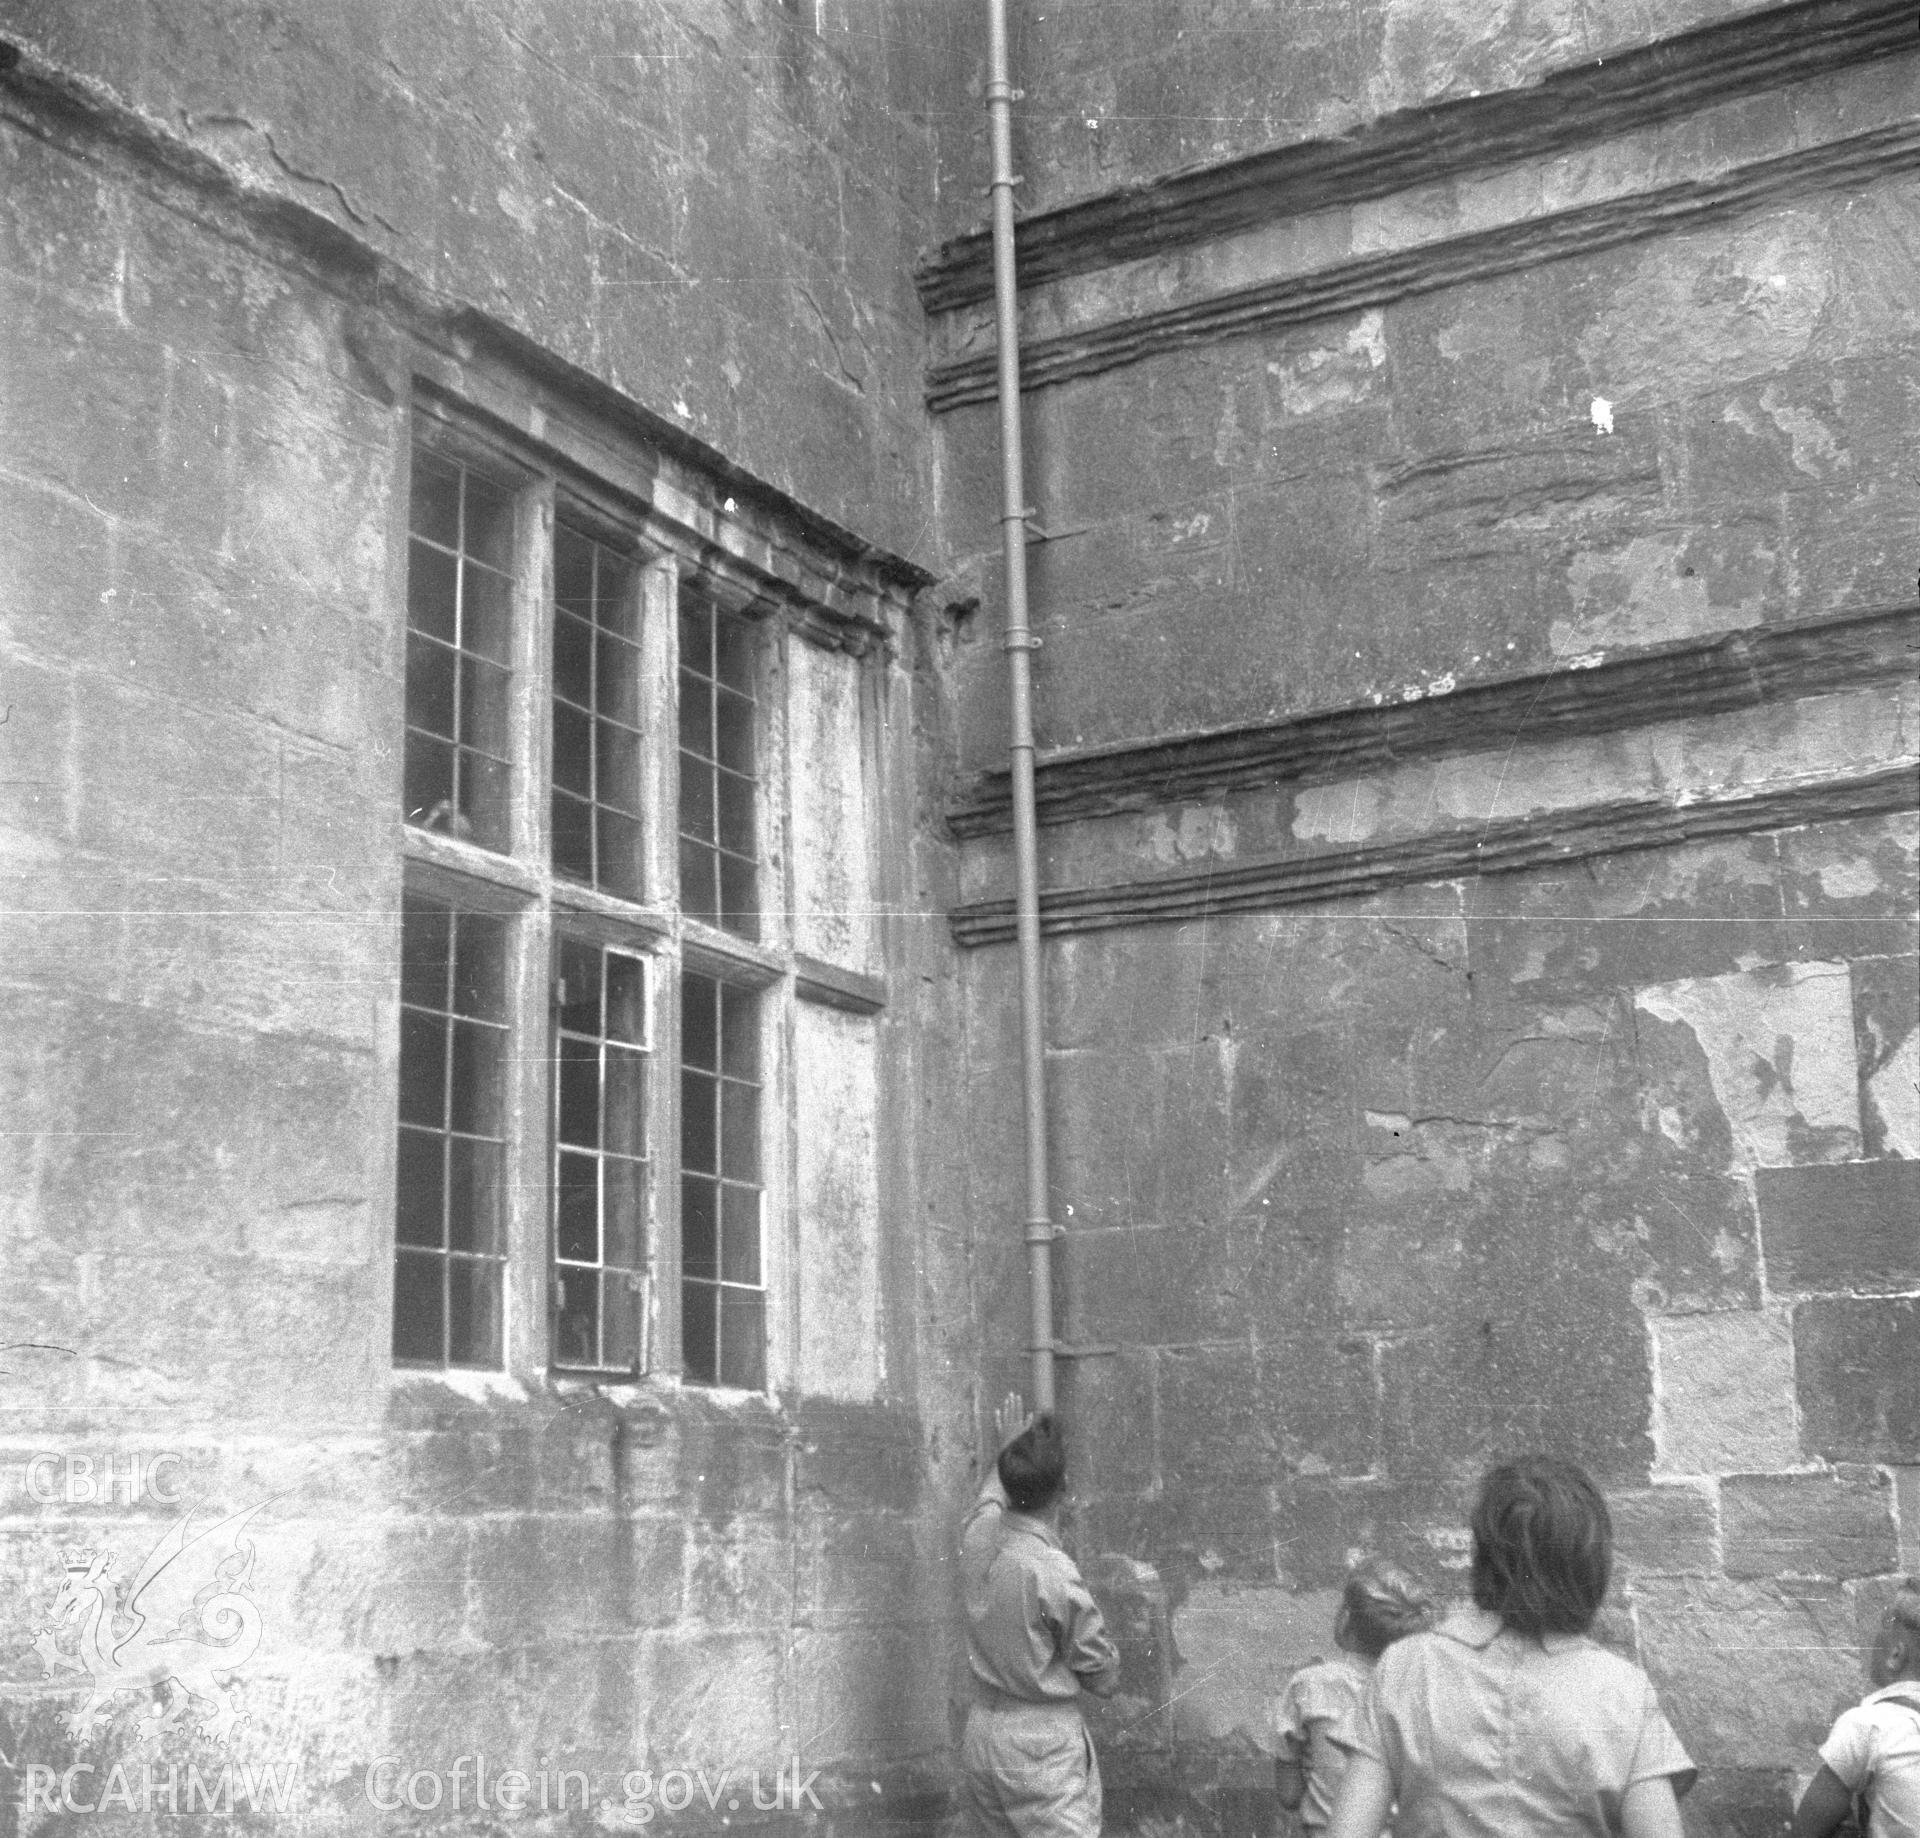 Digital copy of an undated nitrate negative showing building detail at Treowen, Monmouthshire.